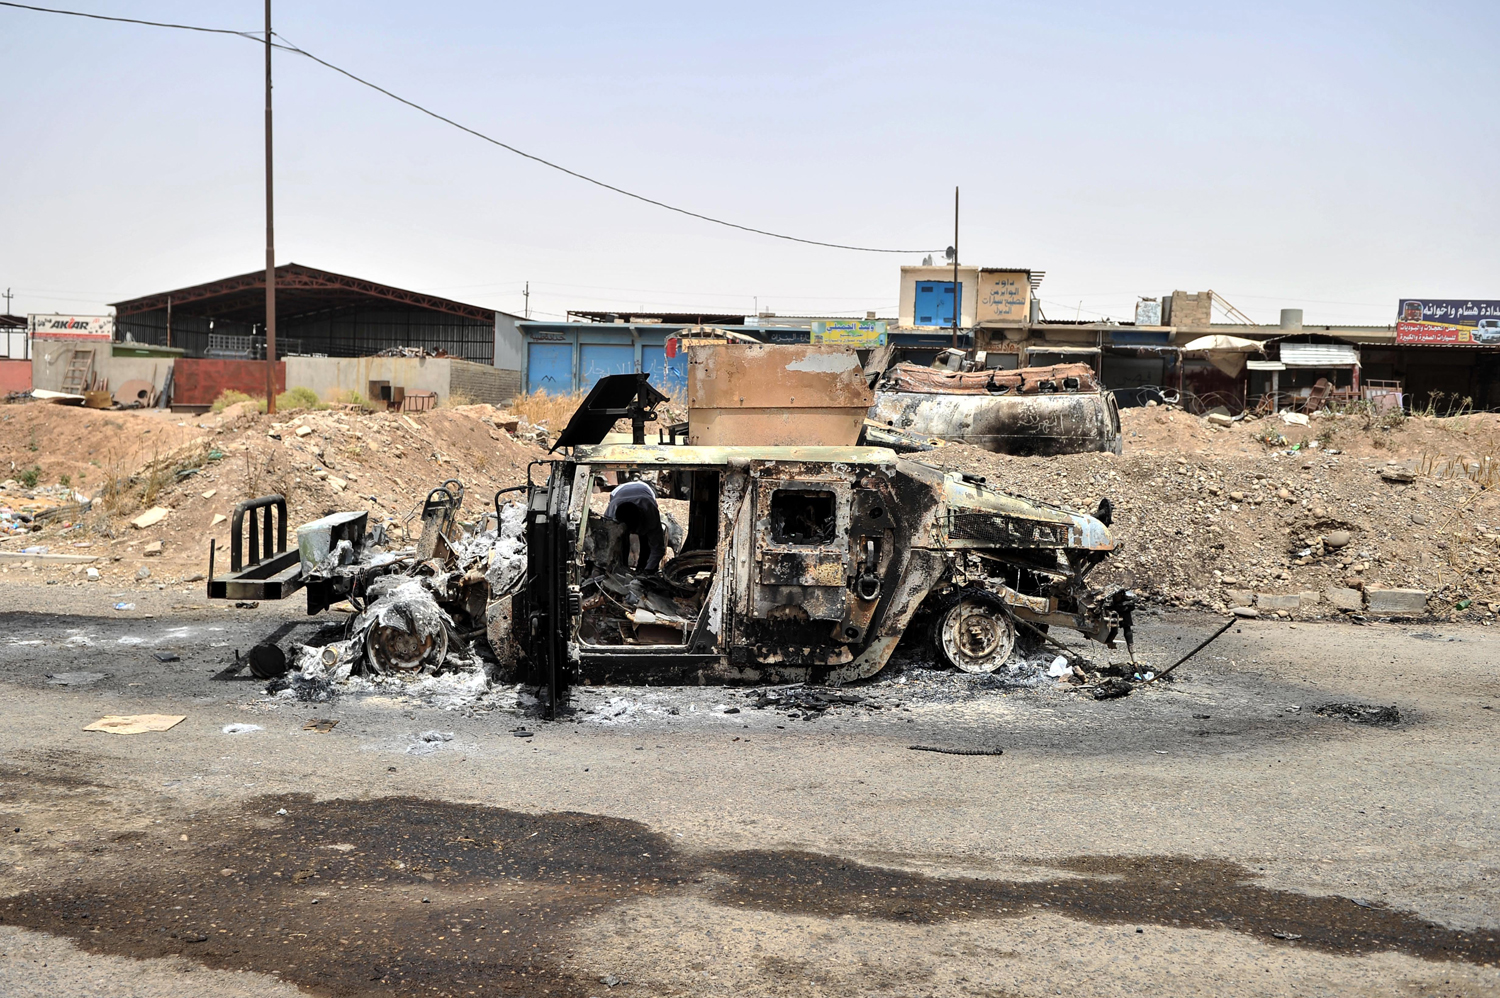 An Iraq army vehicle is seen burned by militants in Mosul, on June 12, 2014.